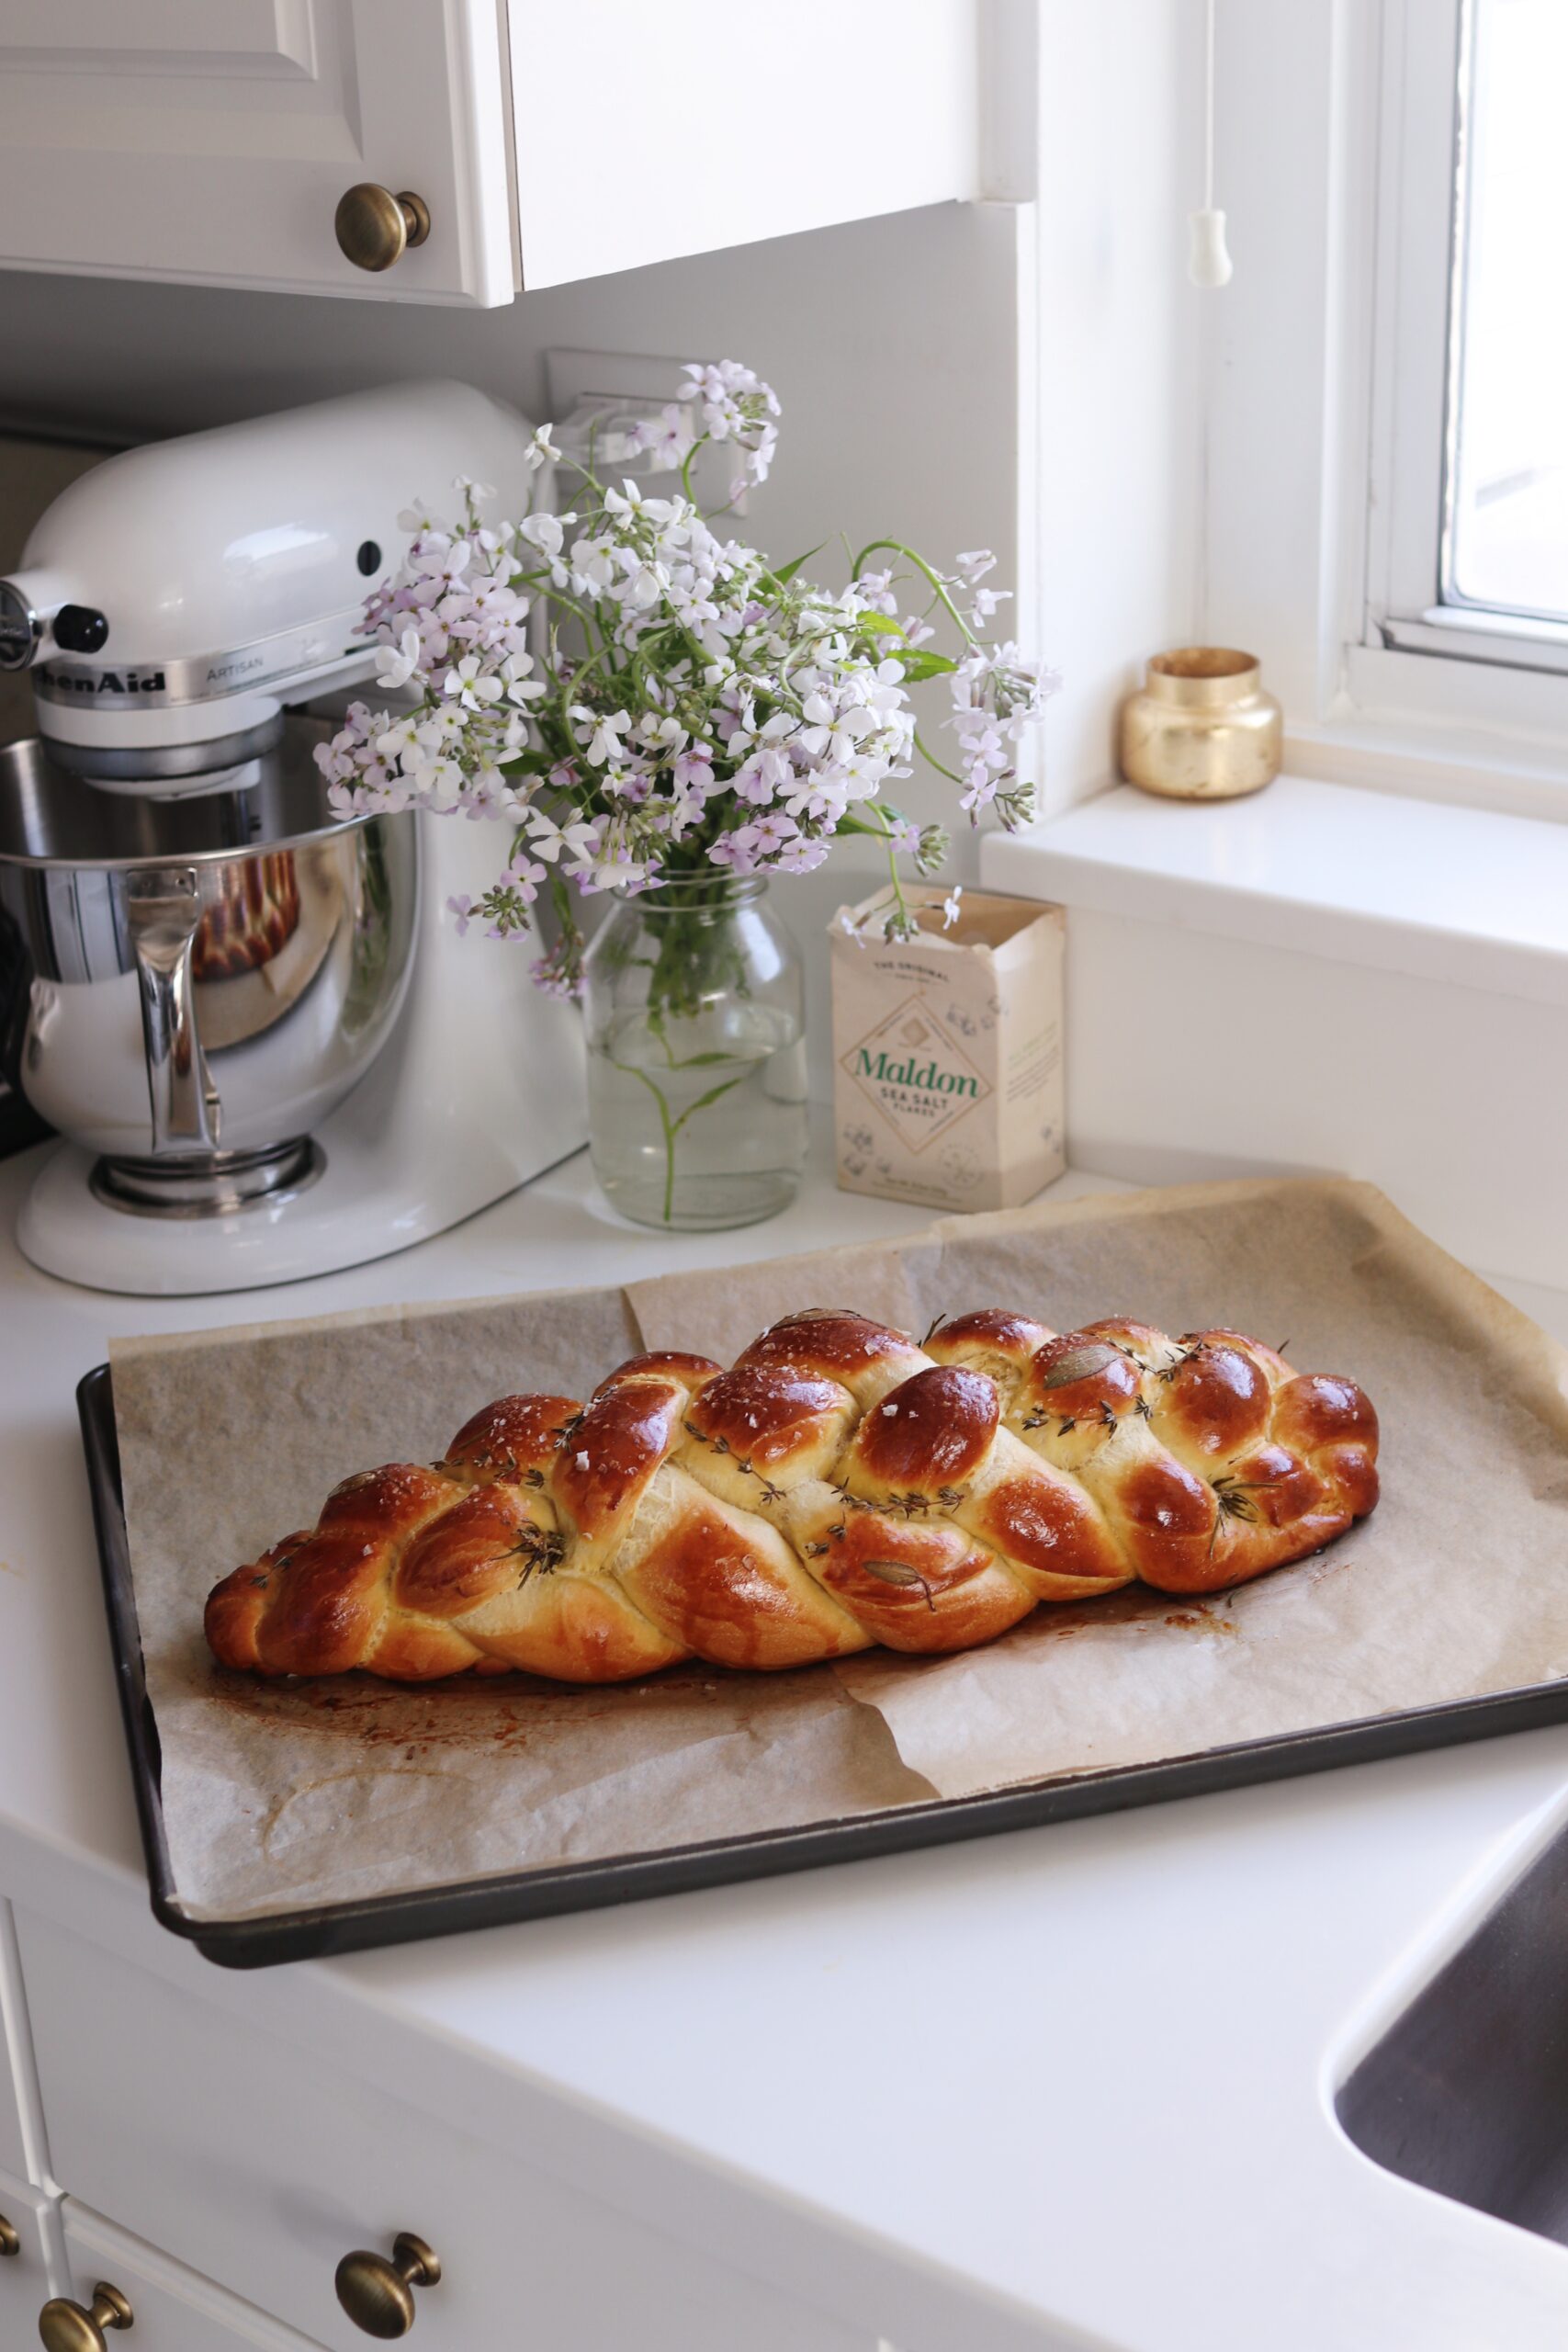 My Challah Recipe, Modified For A Stand Mixer